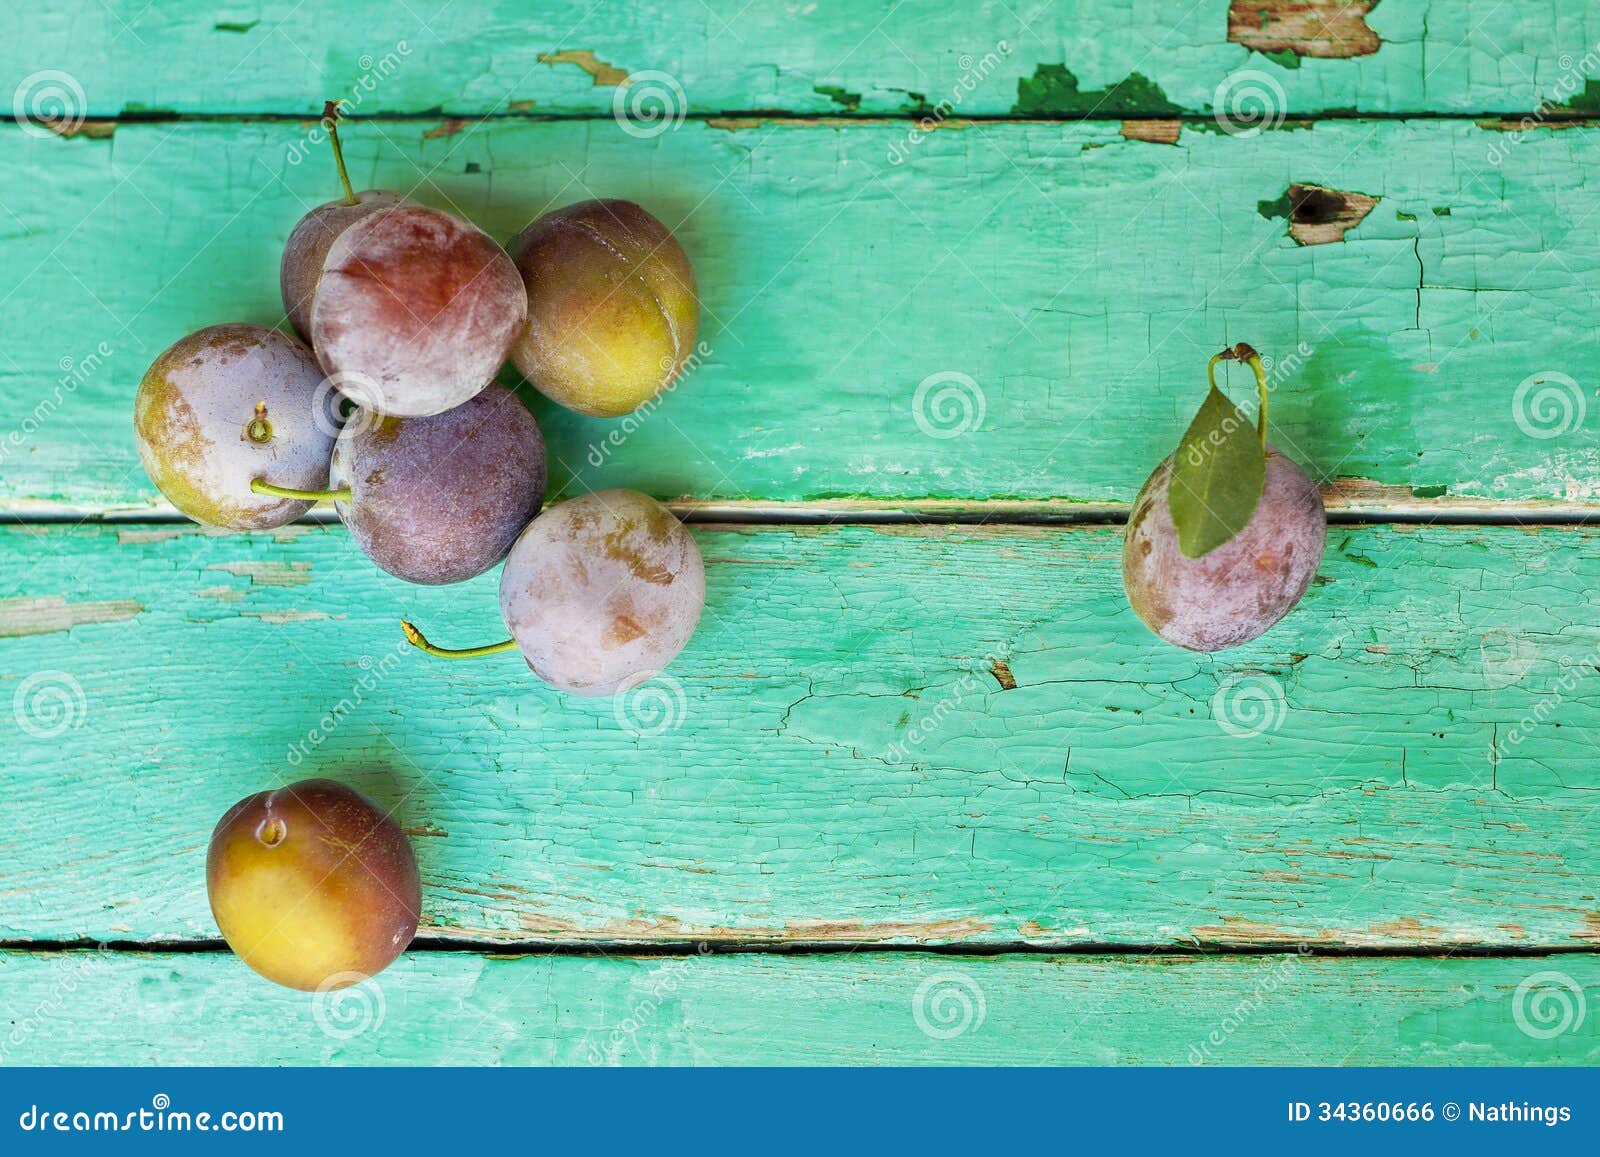 plums on old turquose color surface